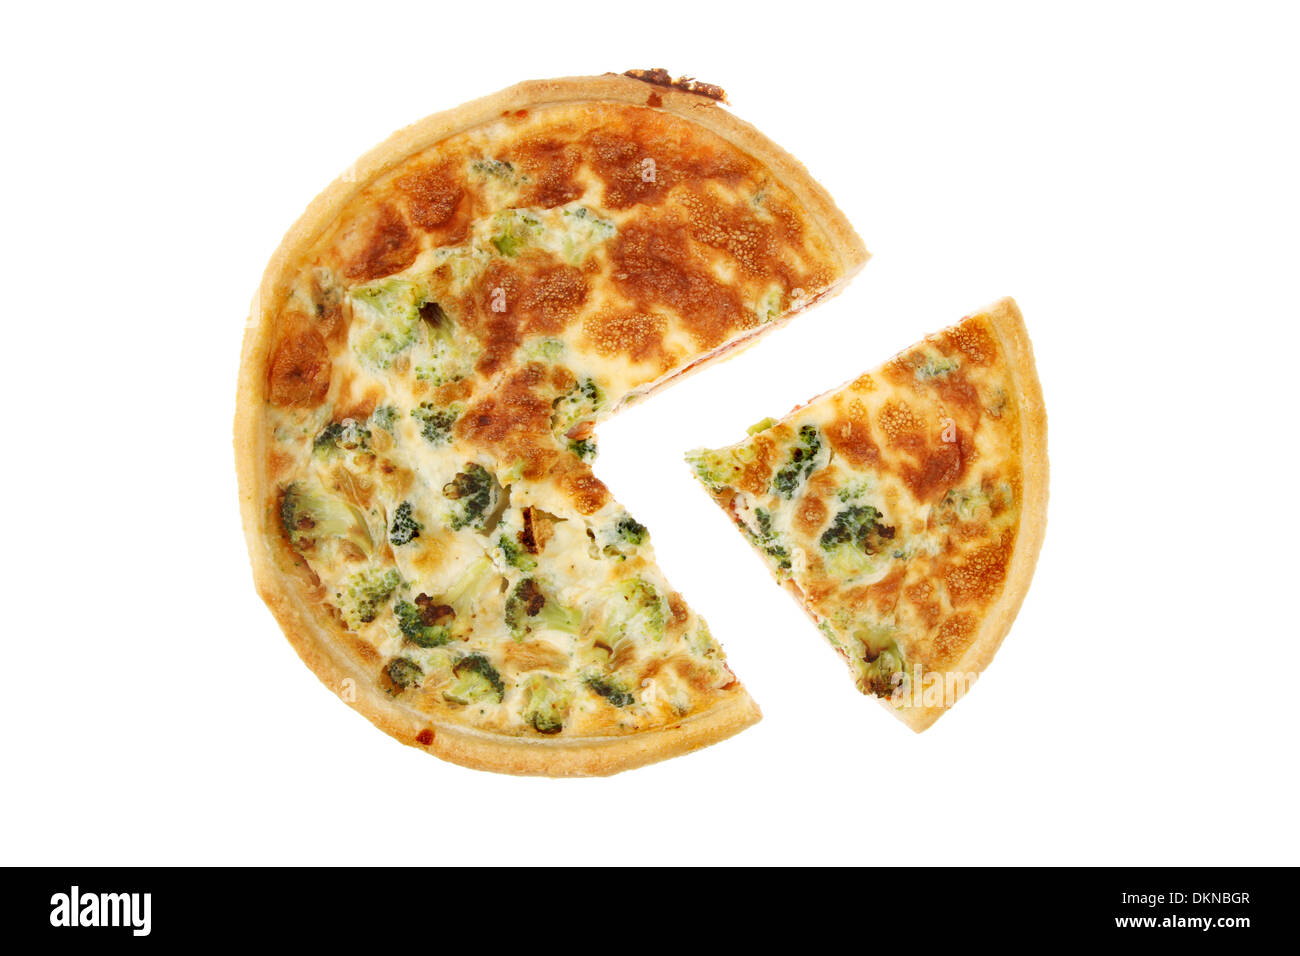 Broccoli, cheese and tomato quiche with a section cut out isolated against white Stock Photo